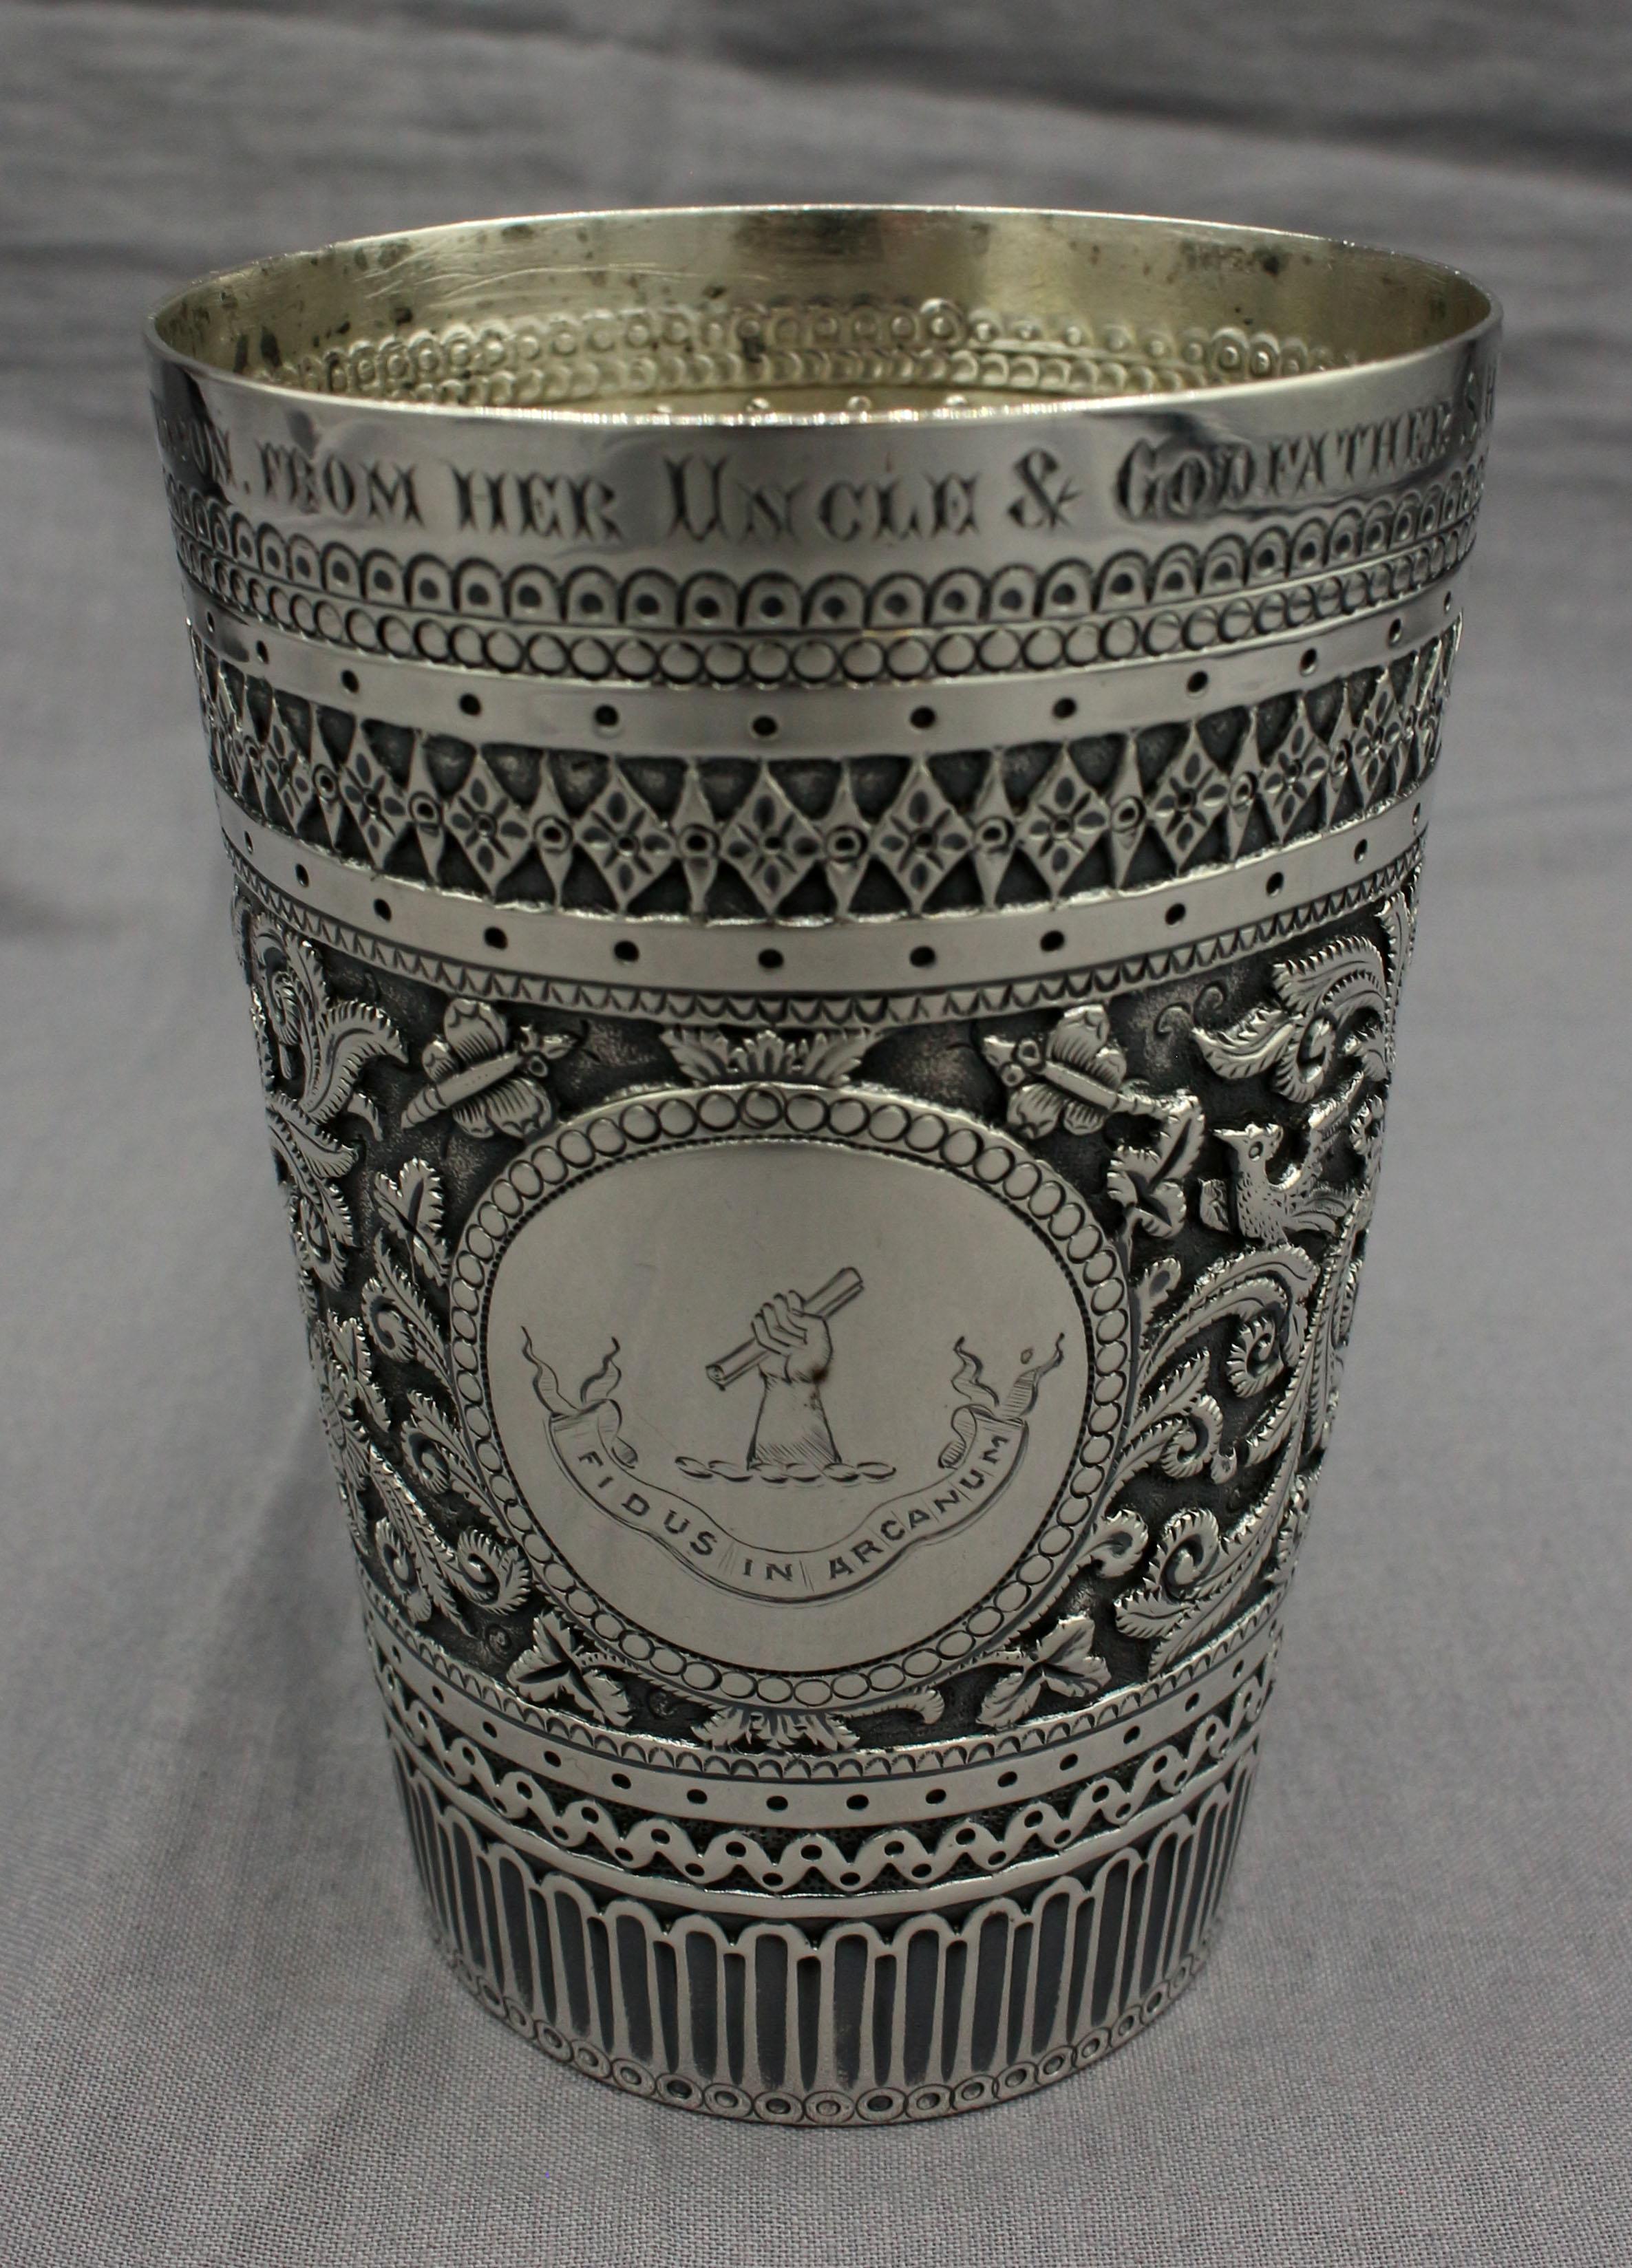 1878 sterling silver beaker, London, made by Henry Holland. Presentation inscription: Annette Orme Stevenson from her Uncle & Godfather S.H. Fourdrinier. In the exotic hand chased style of the Aesthetic Movement. Motto: Fidus in Arcanum (Faithful in